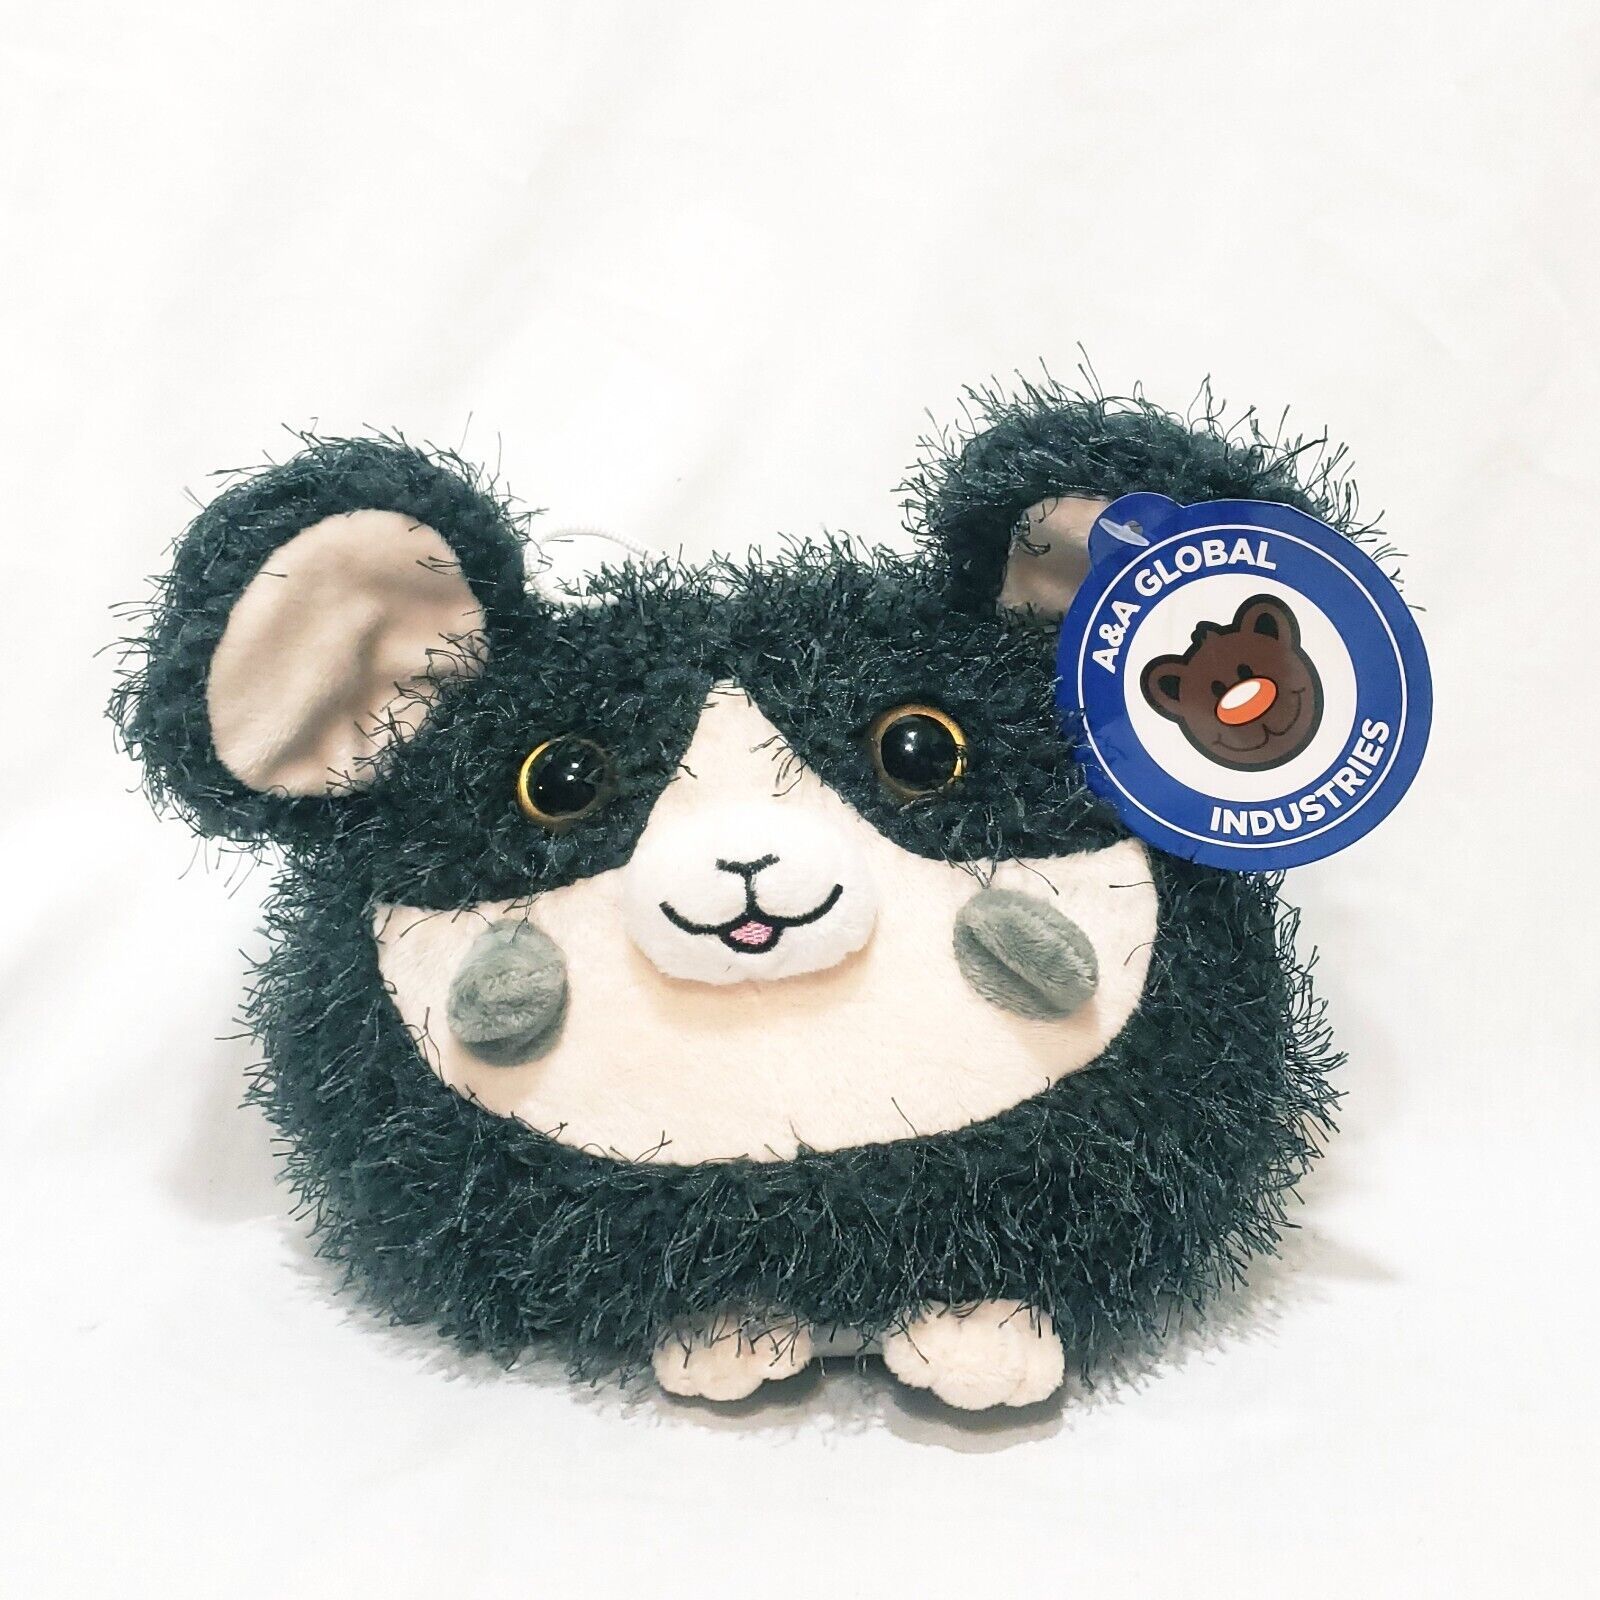 Gray Mouse Hamster with Big Ears A&A Global Ind. 2021 Plush Stuffed Animal 7" - $17.81